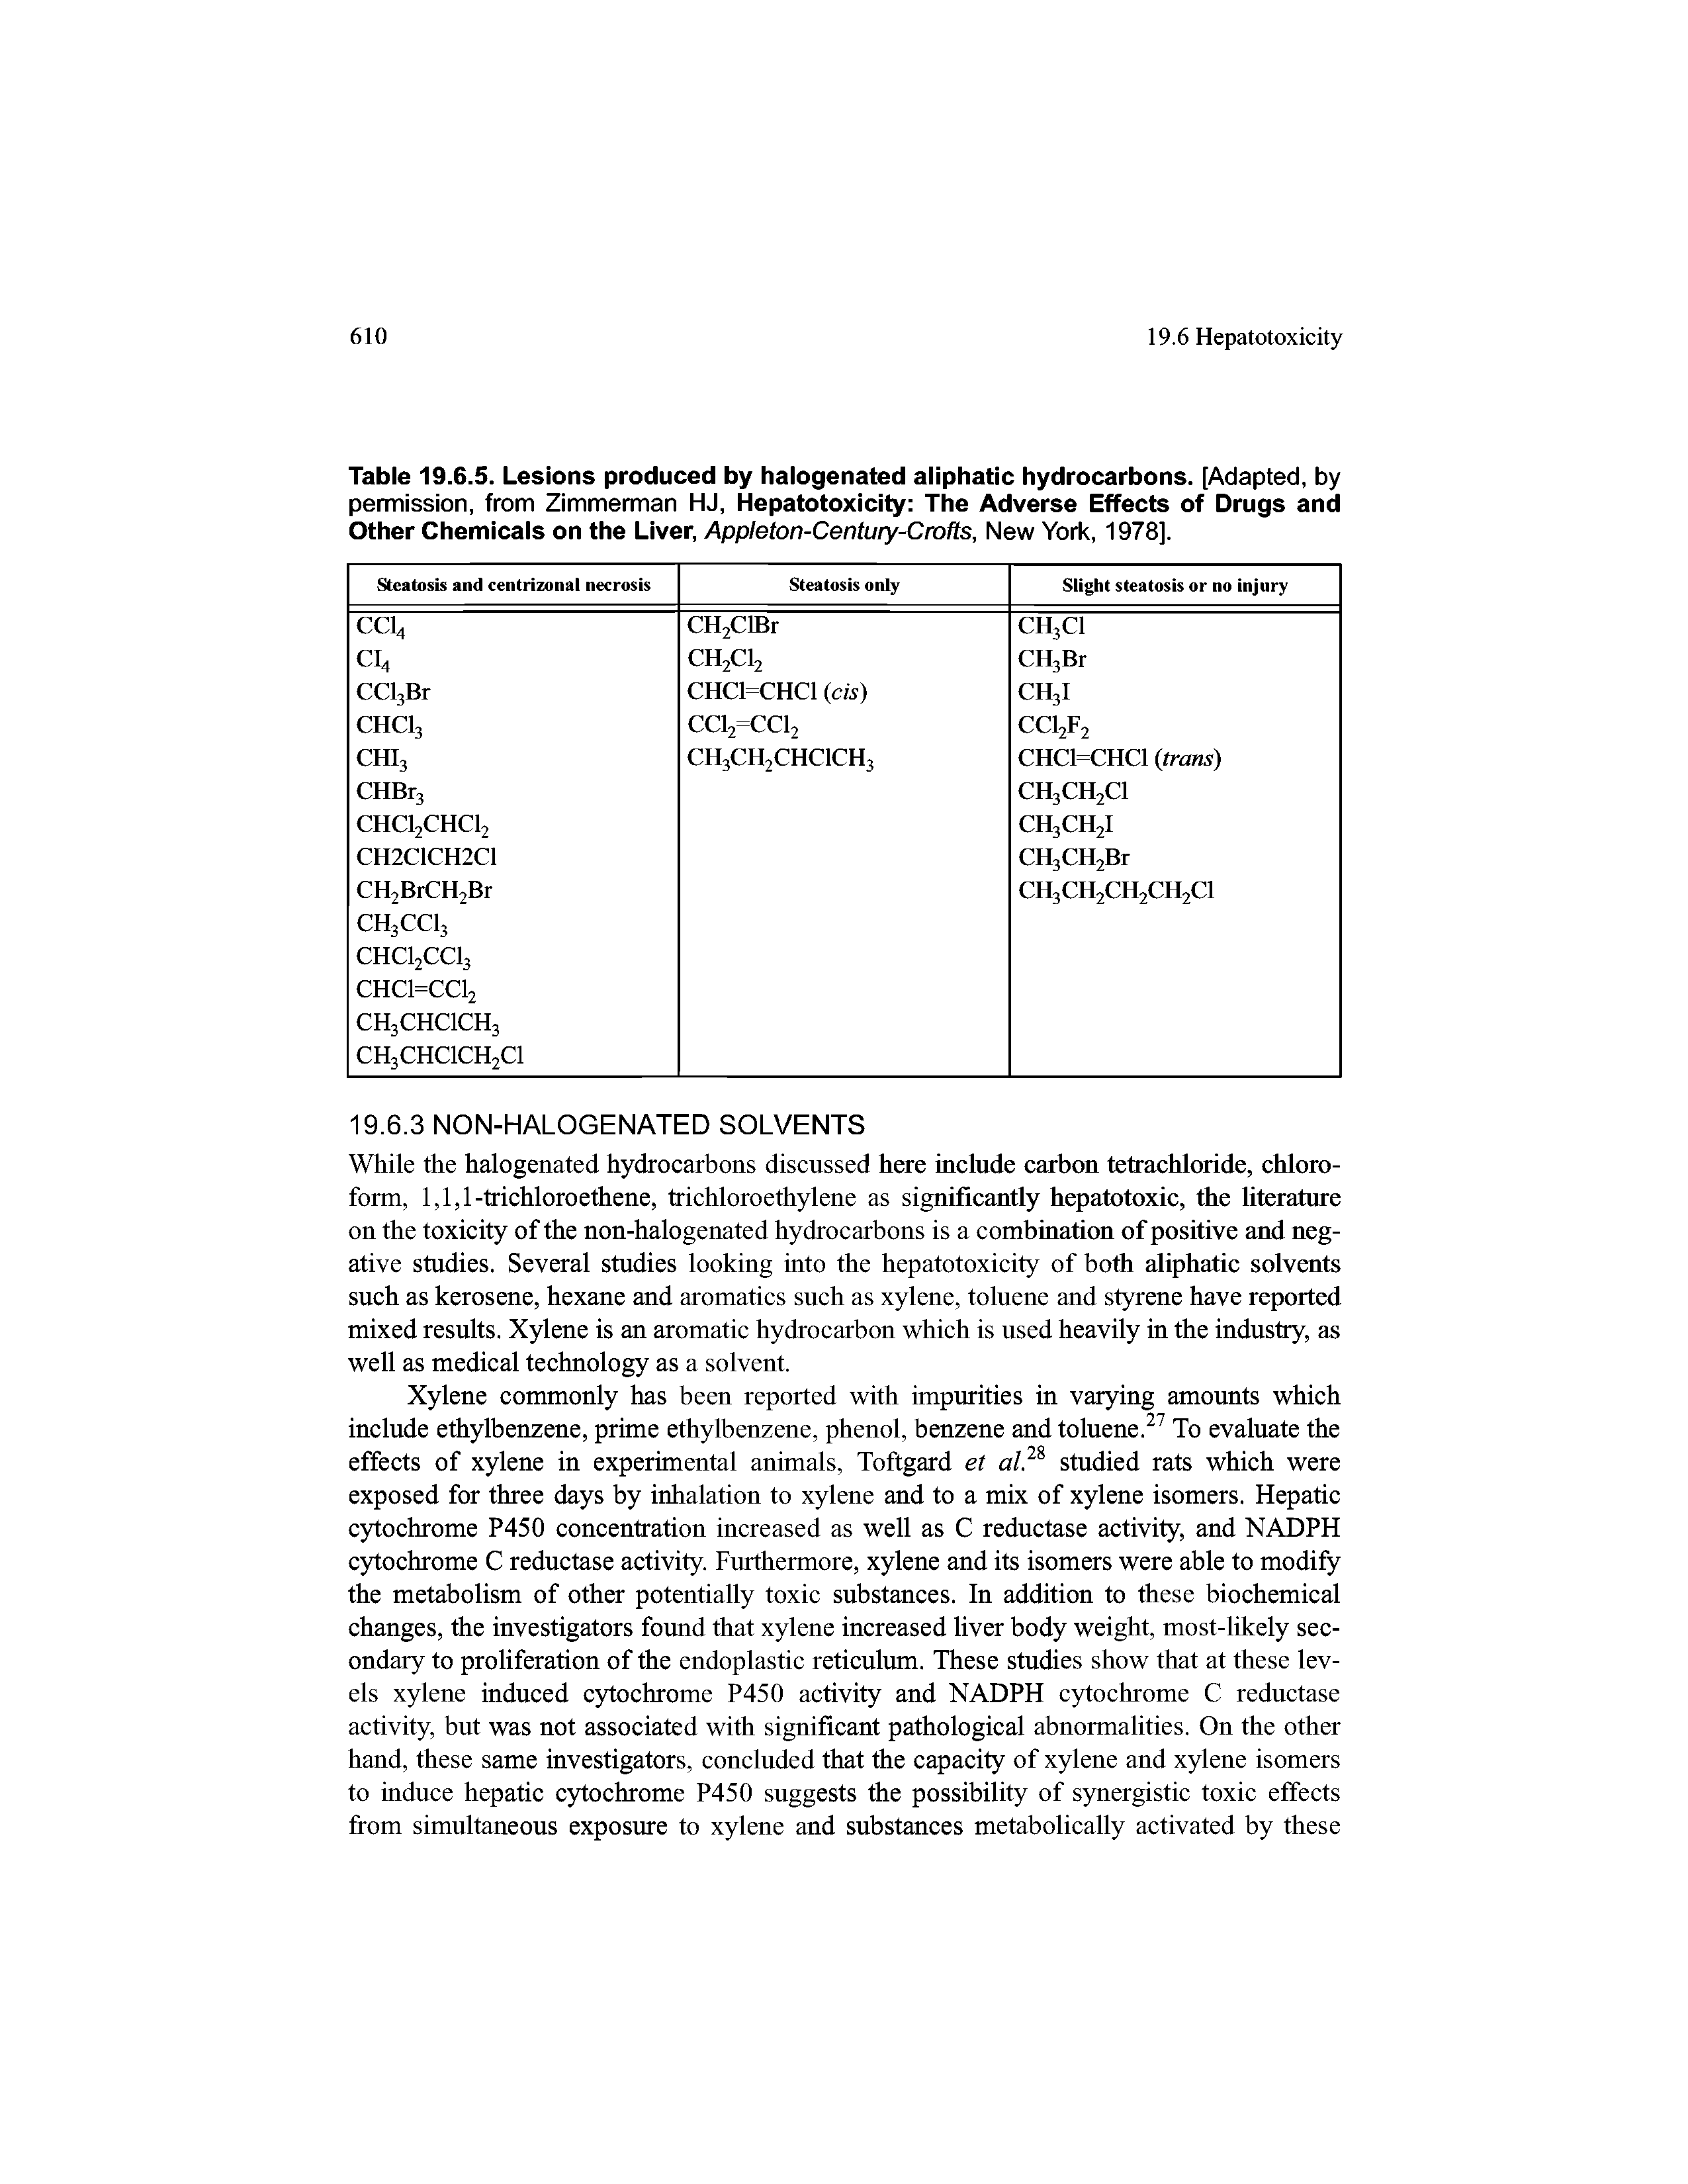 Table 19.6.5. Lesions produced by halogenated aliphatic hydrocarbons. [Adapted, by permission, from Zimmerman HJ, Hepatotoxicity The Adverse Effects of Drugs and Other Chemicals on the Liver, Appleton-Century-Crofts, New York, 1978],...